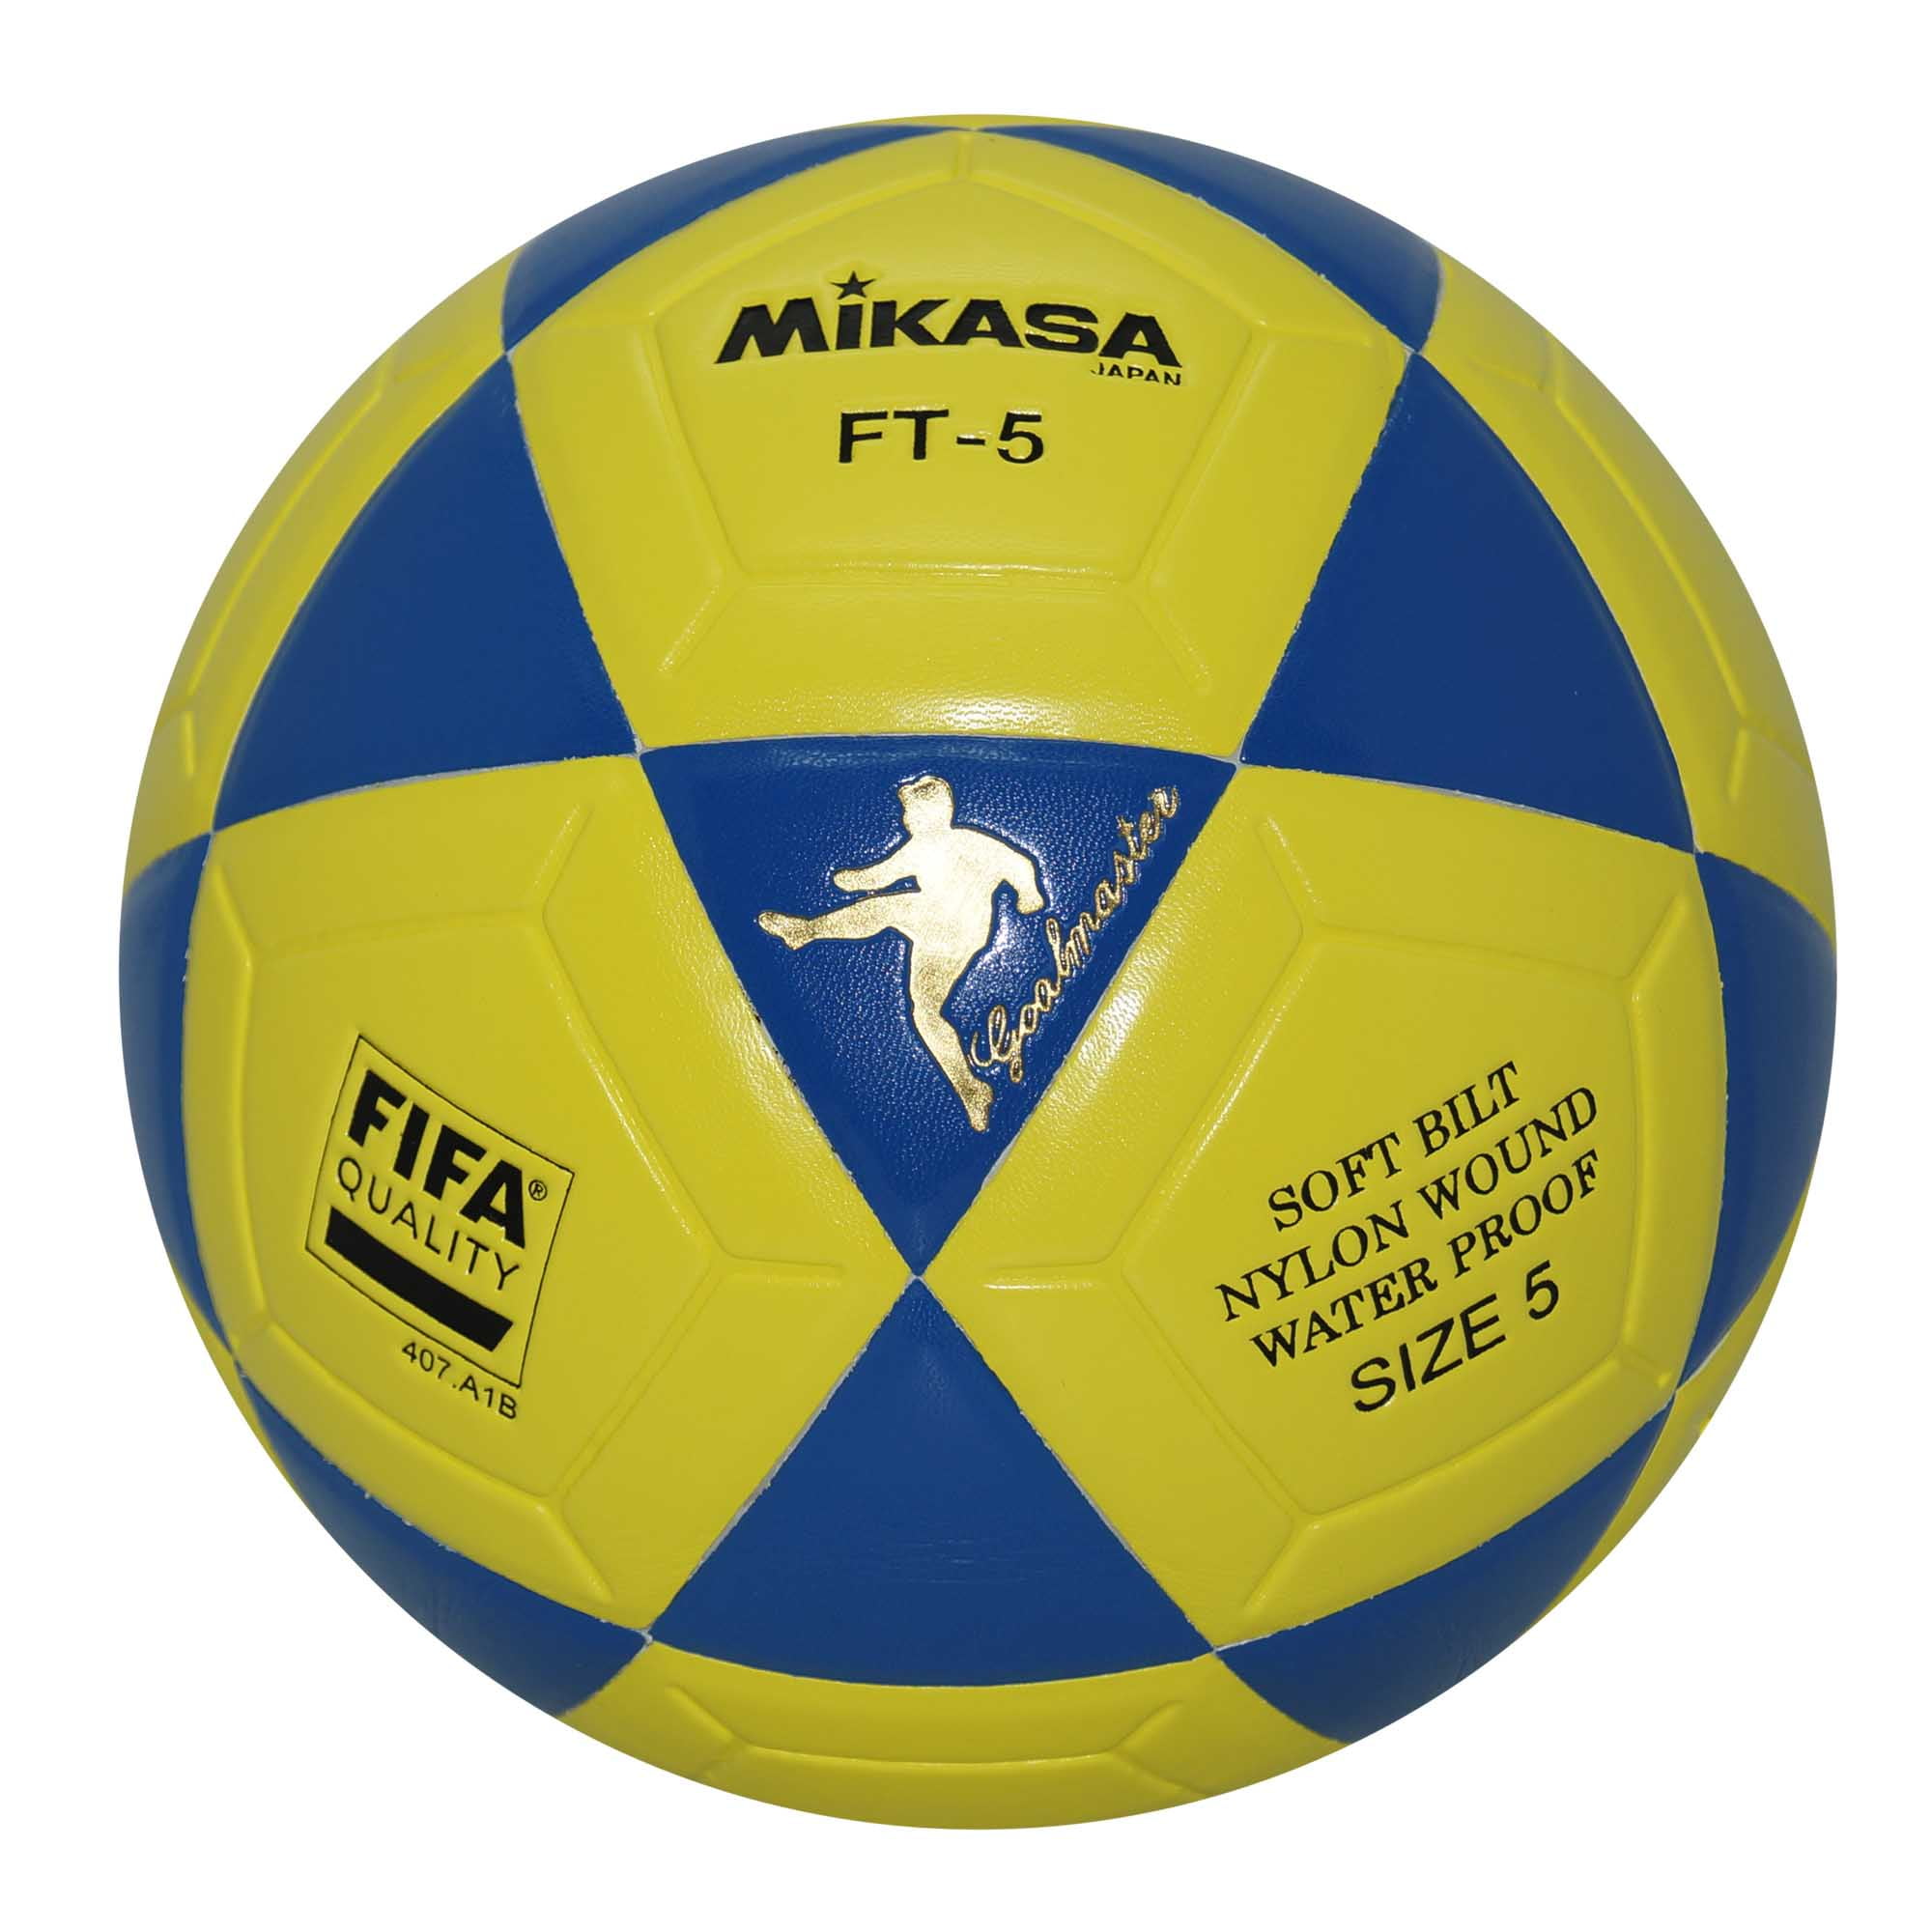 Mikasa Soccer Ball FT5A Series Goal Master Size 5 Listing for 1 ball only 